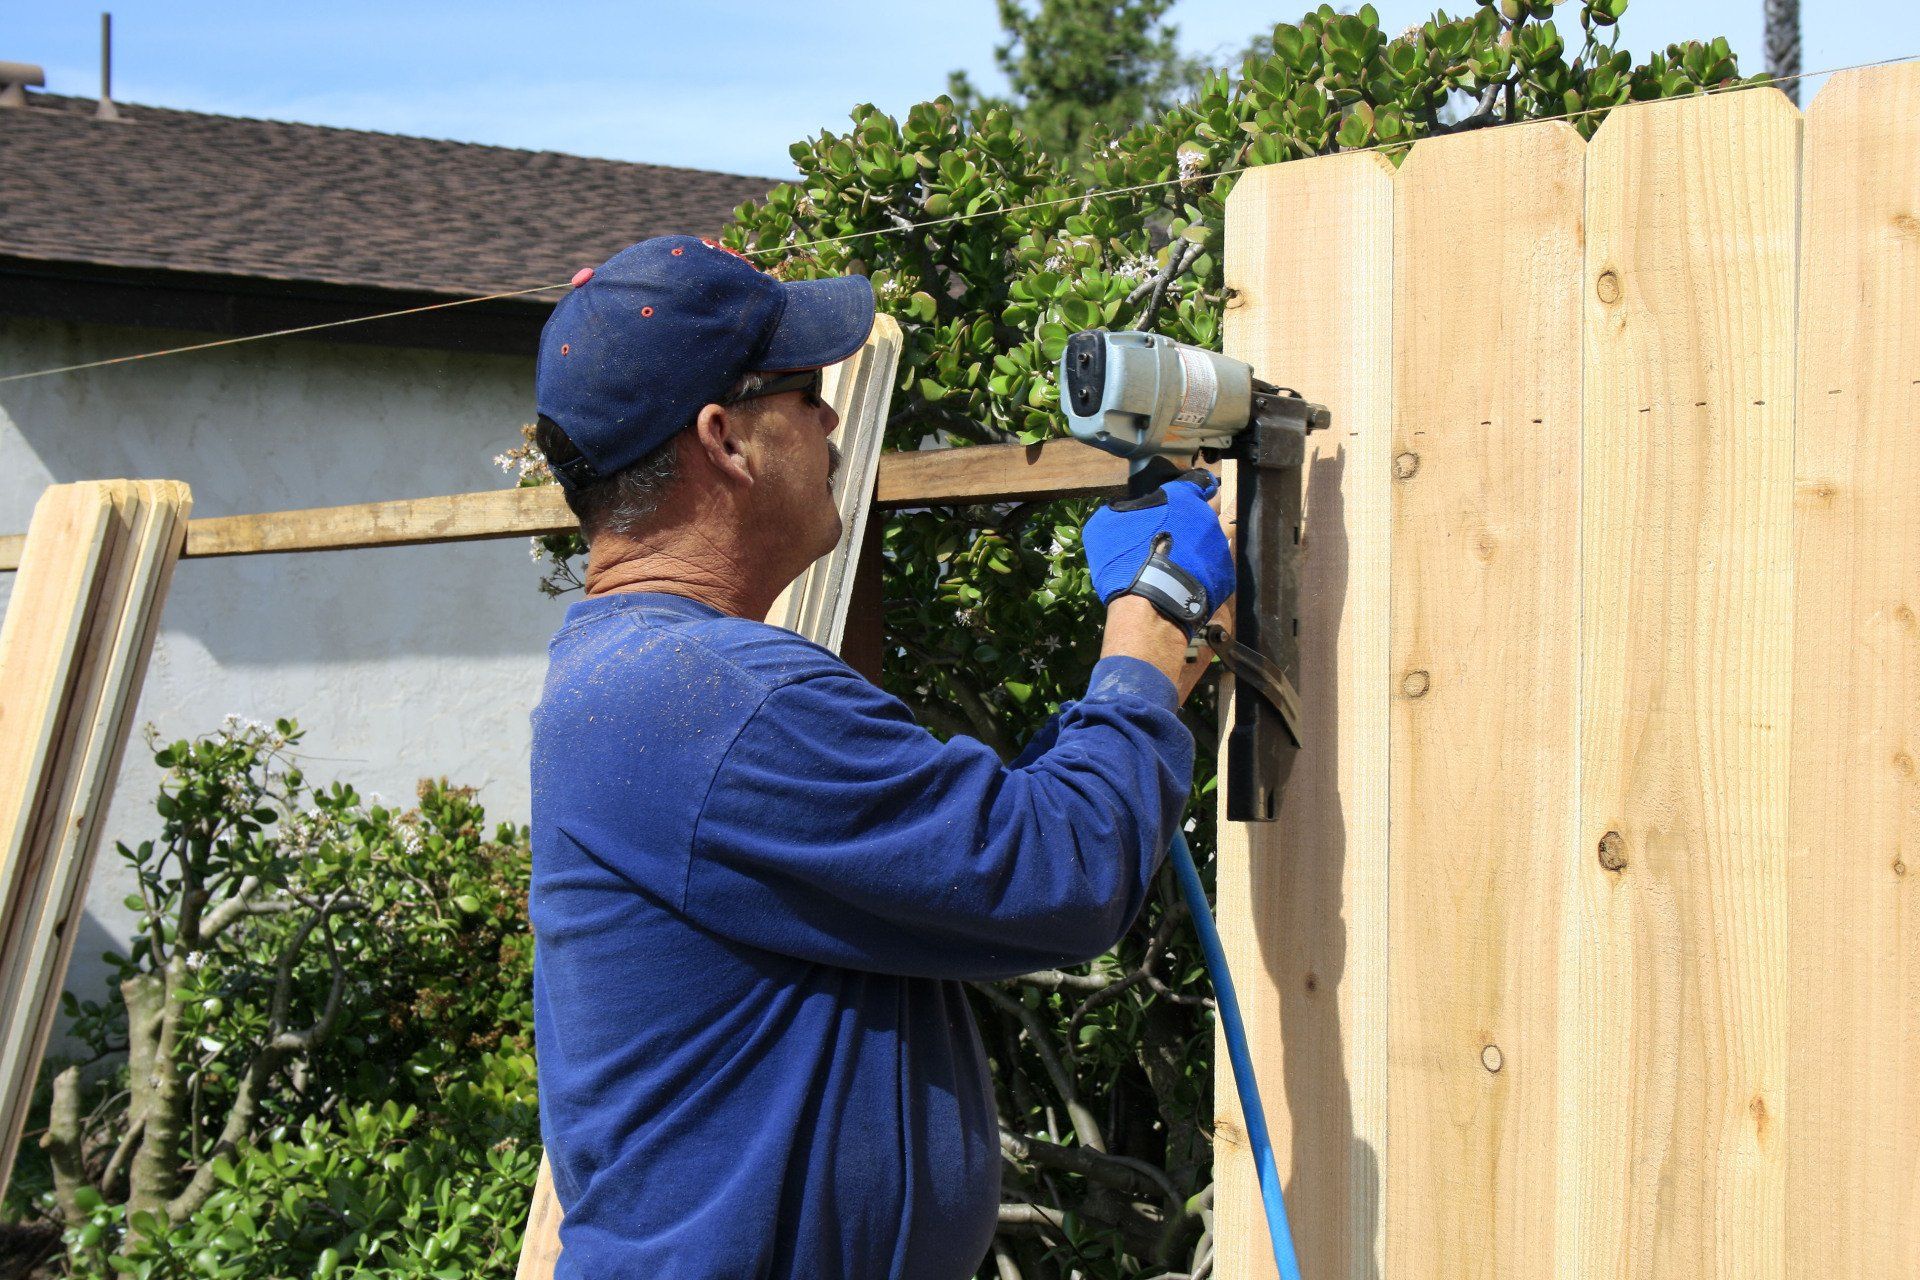 fence installers